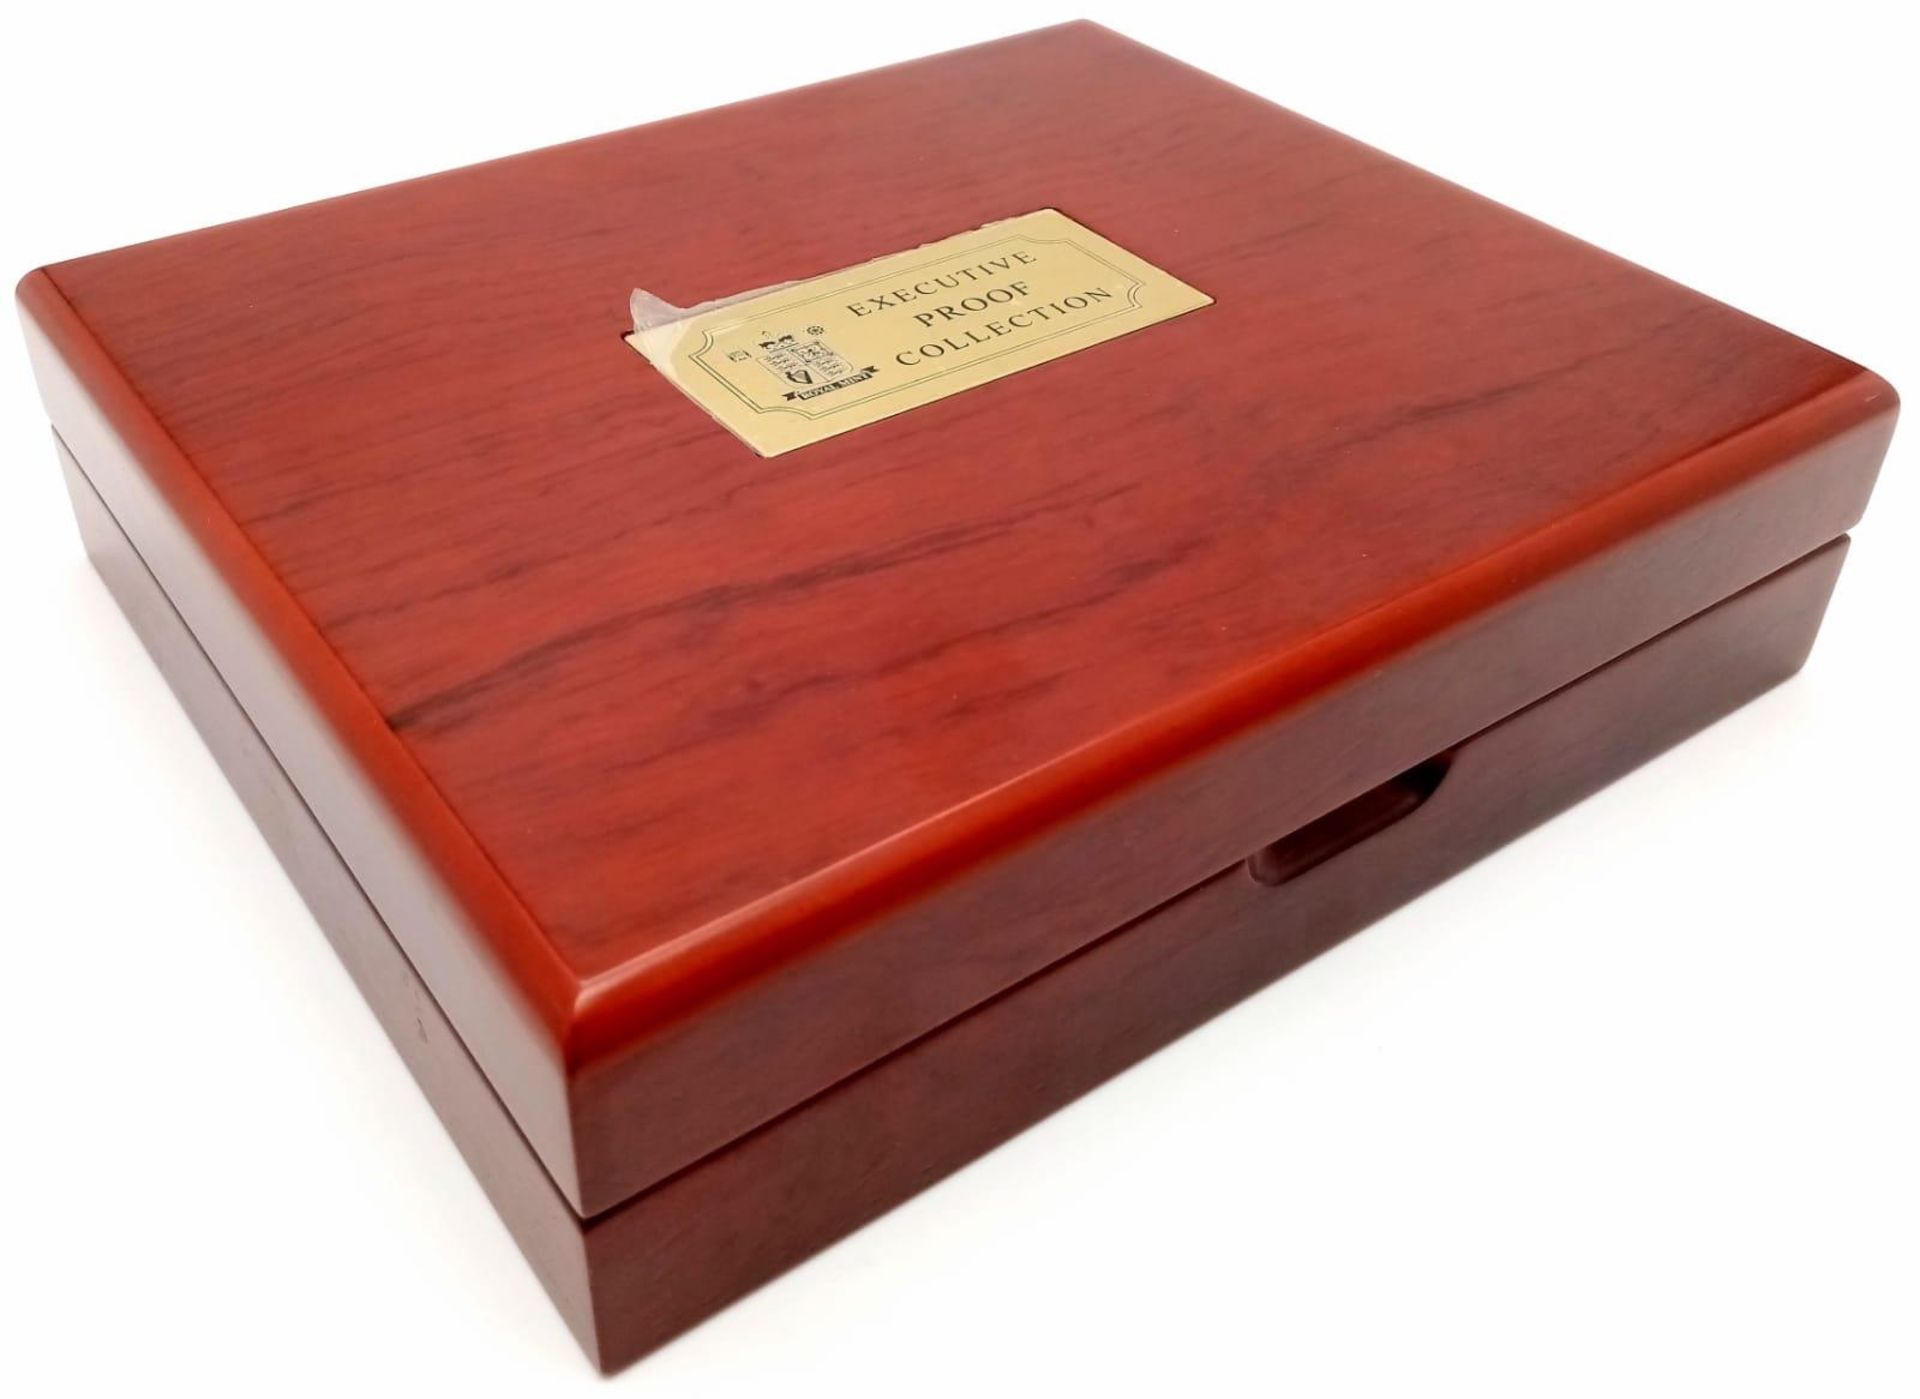 A Royal Mint 2007 Executive Proof Coin Set. 12 coins in total. Comes in a wood presentation case. - Image 4 of 4